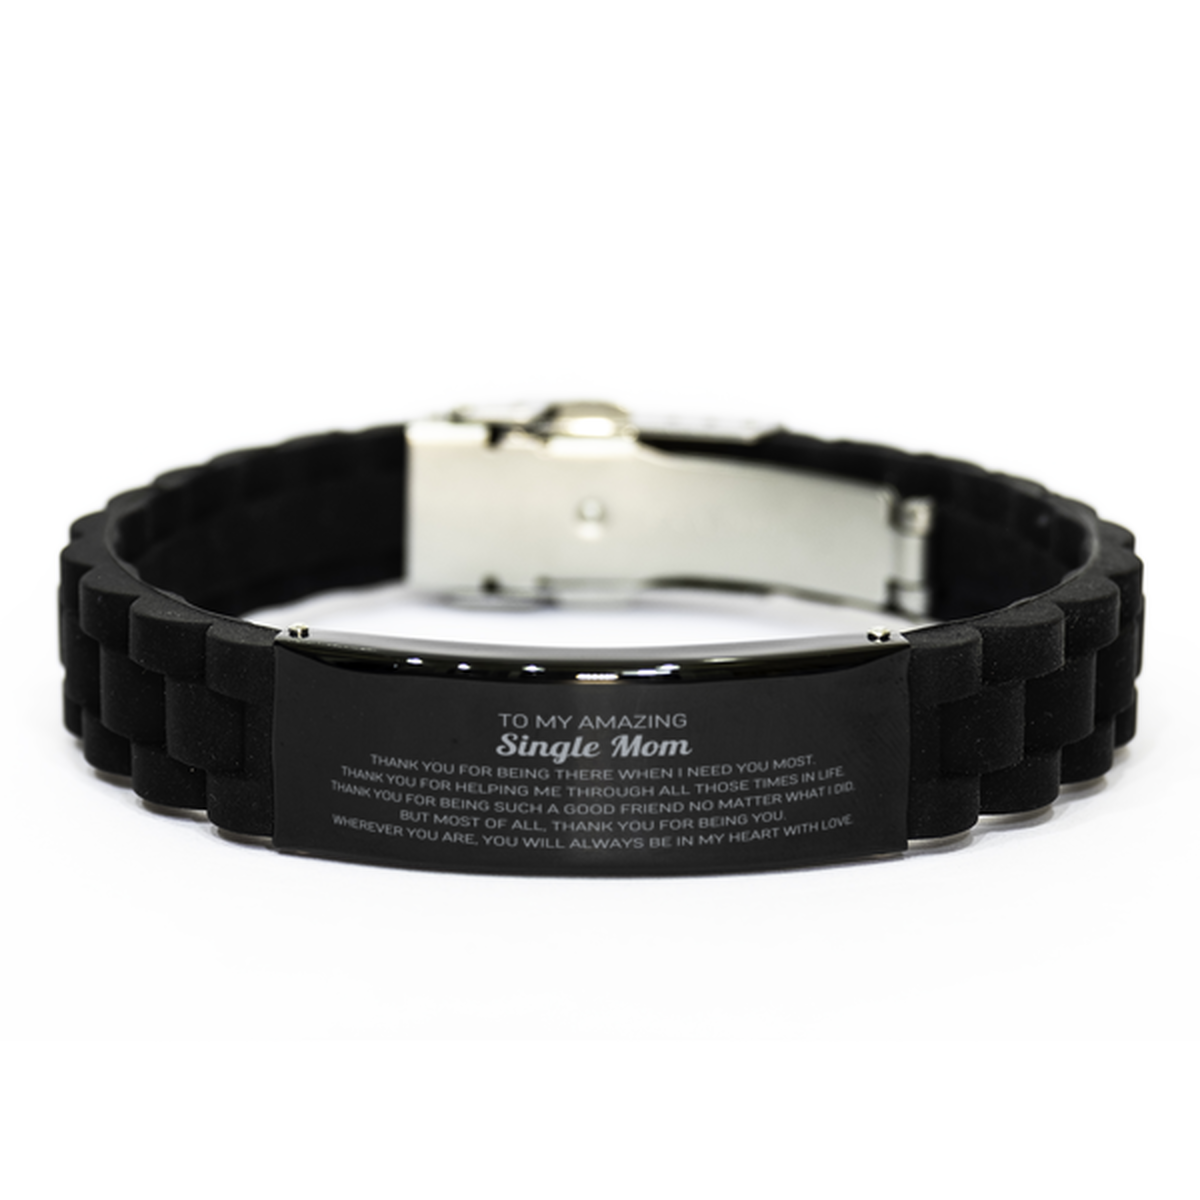 To My Amazing Single Mom Black Glidelock Clasp Bracelet, Thank you for being there, Thank You Gifts For Single Mom, Birthday, Christmas Unique Gifts For Single Mom